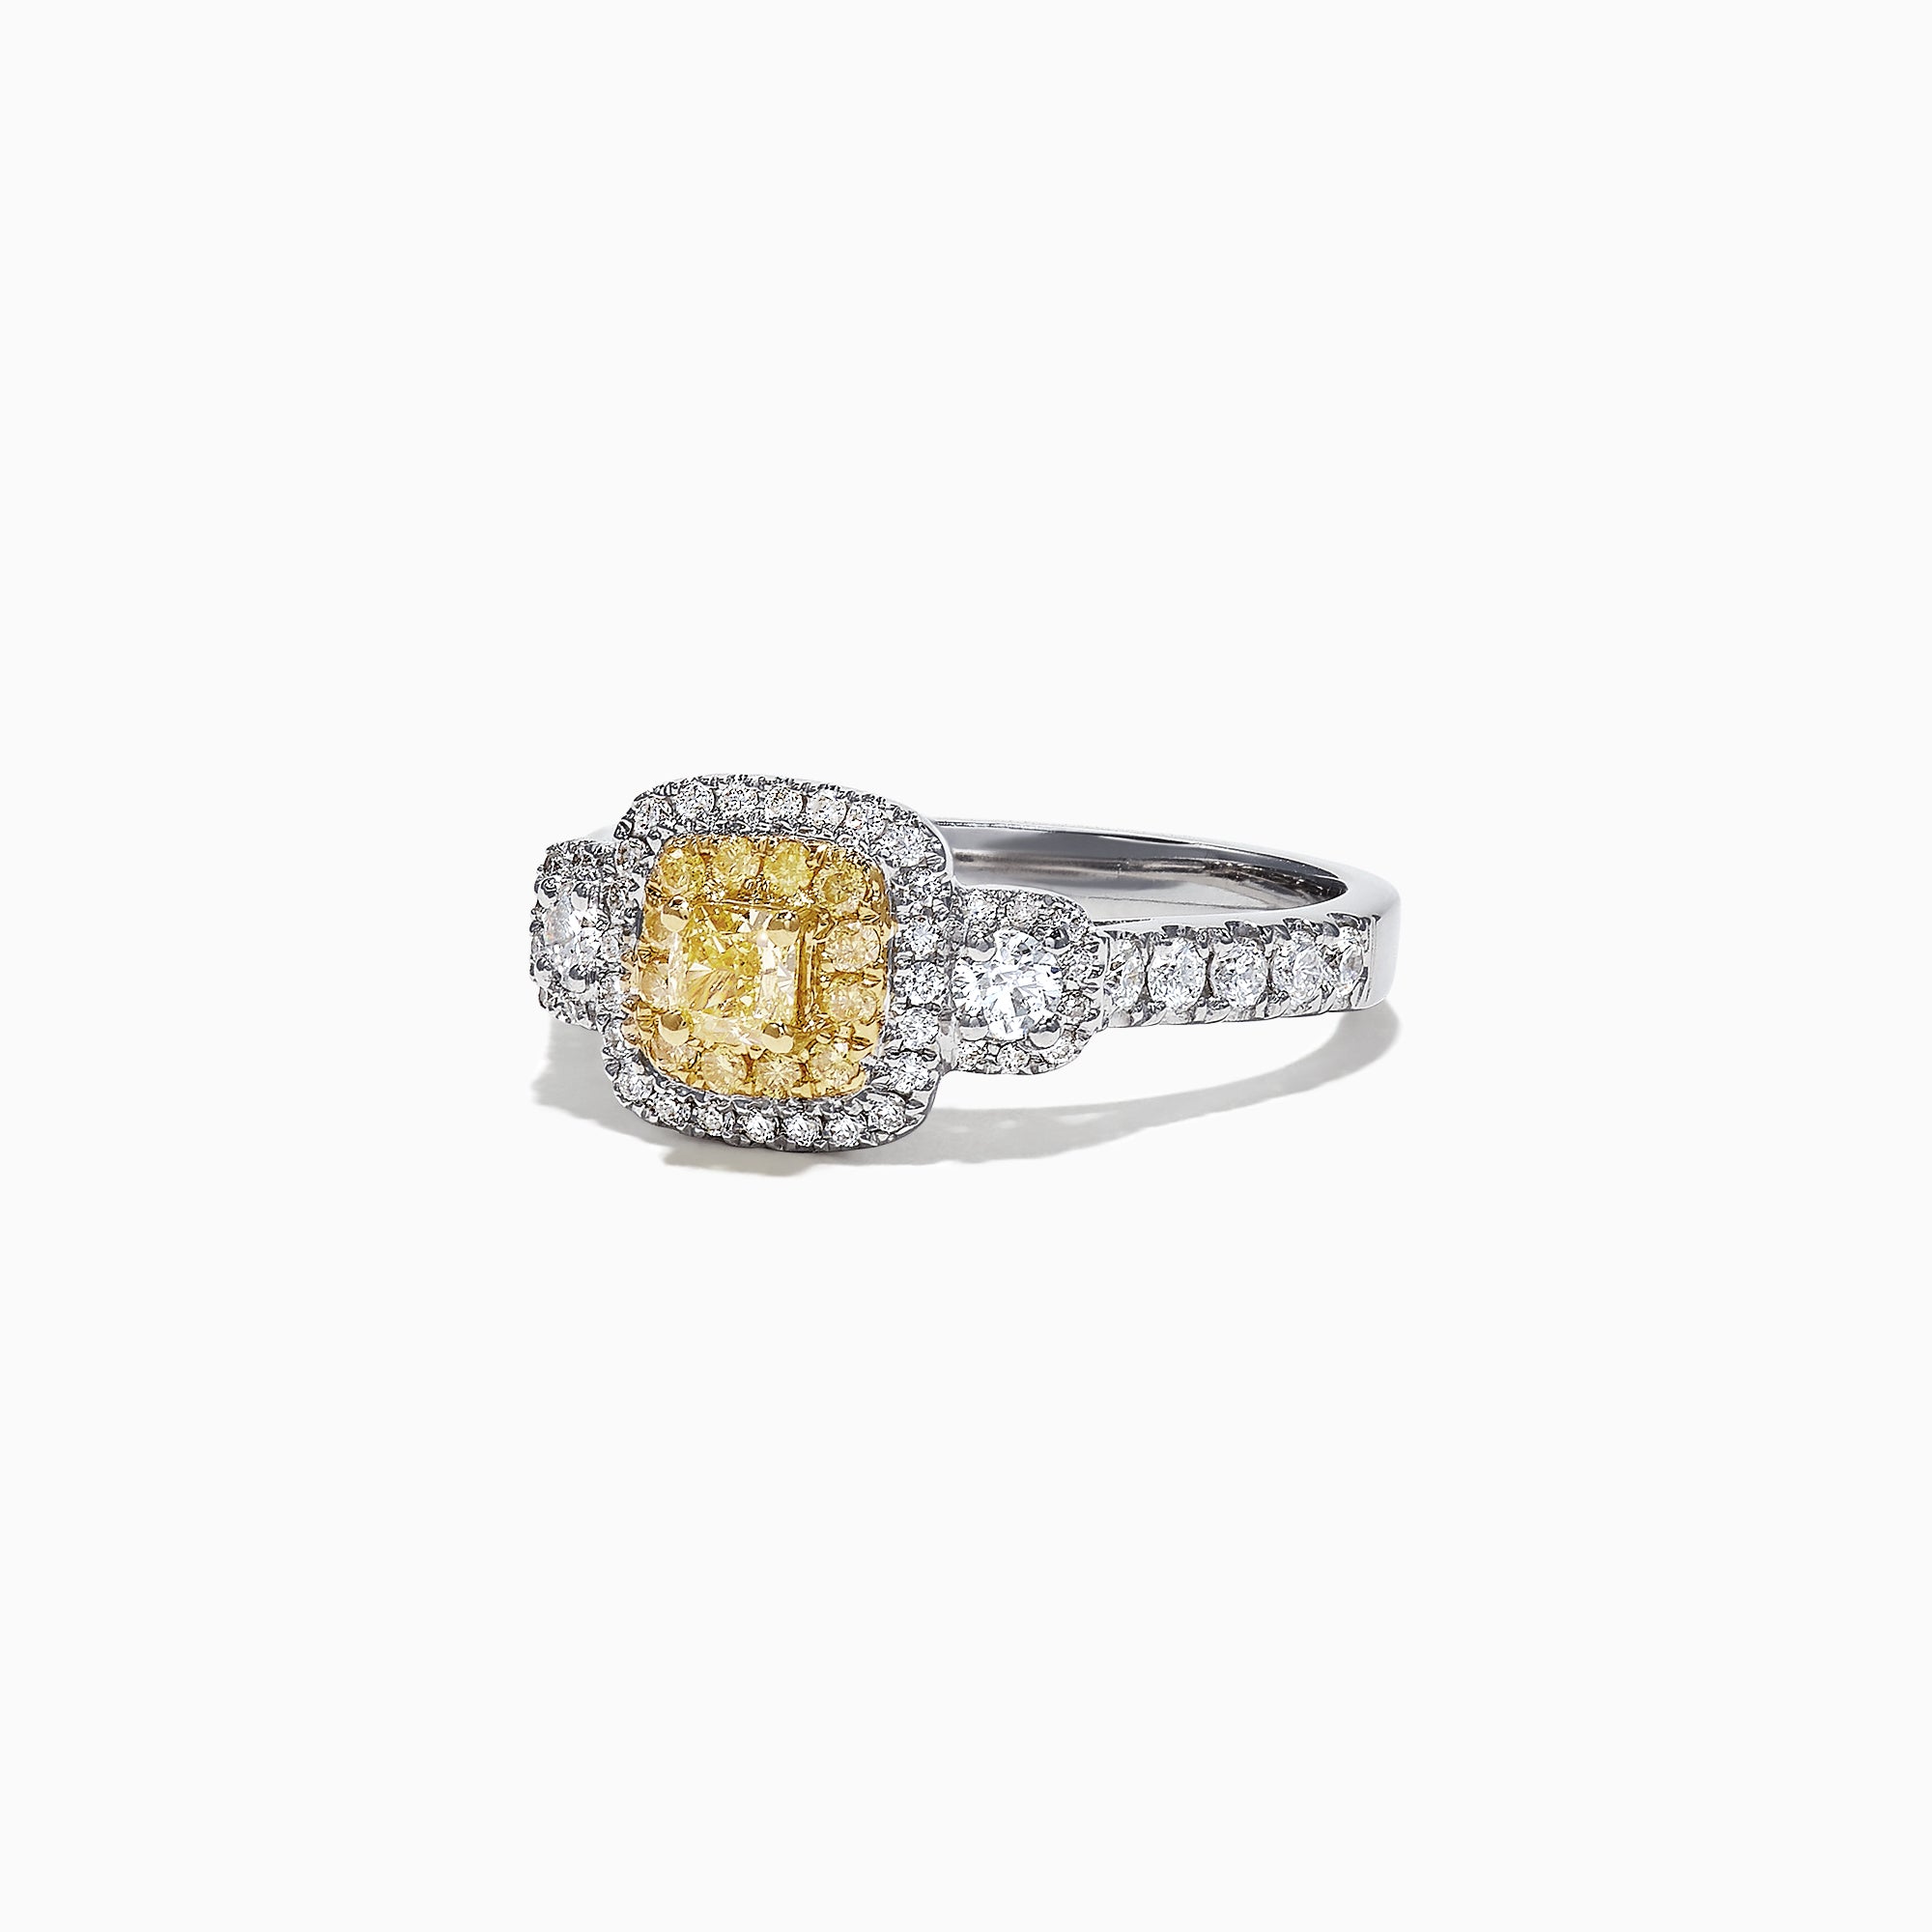 Effy Canare 18K Two-Tone Gold Yellow and White Diamond Ring, 0.96 TCW